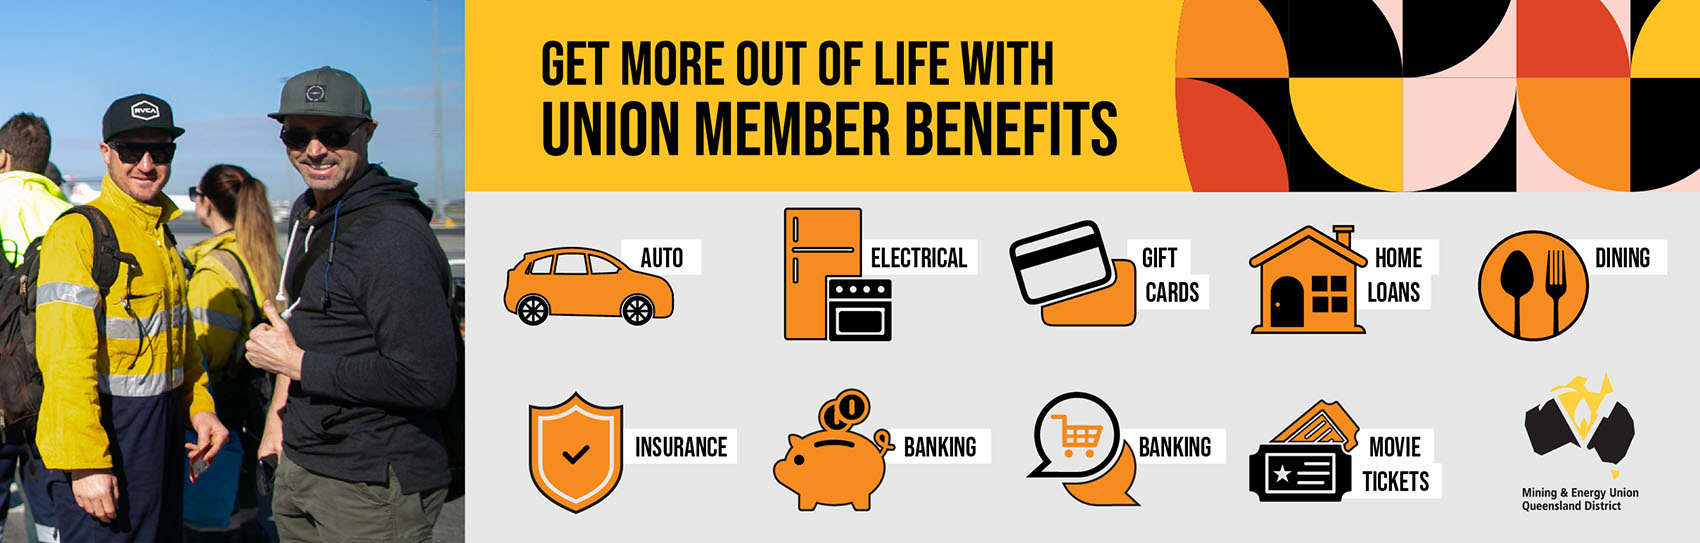 benefits of being a member of the mining & energy union